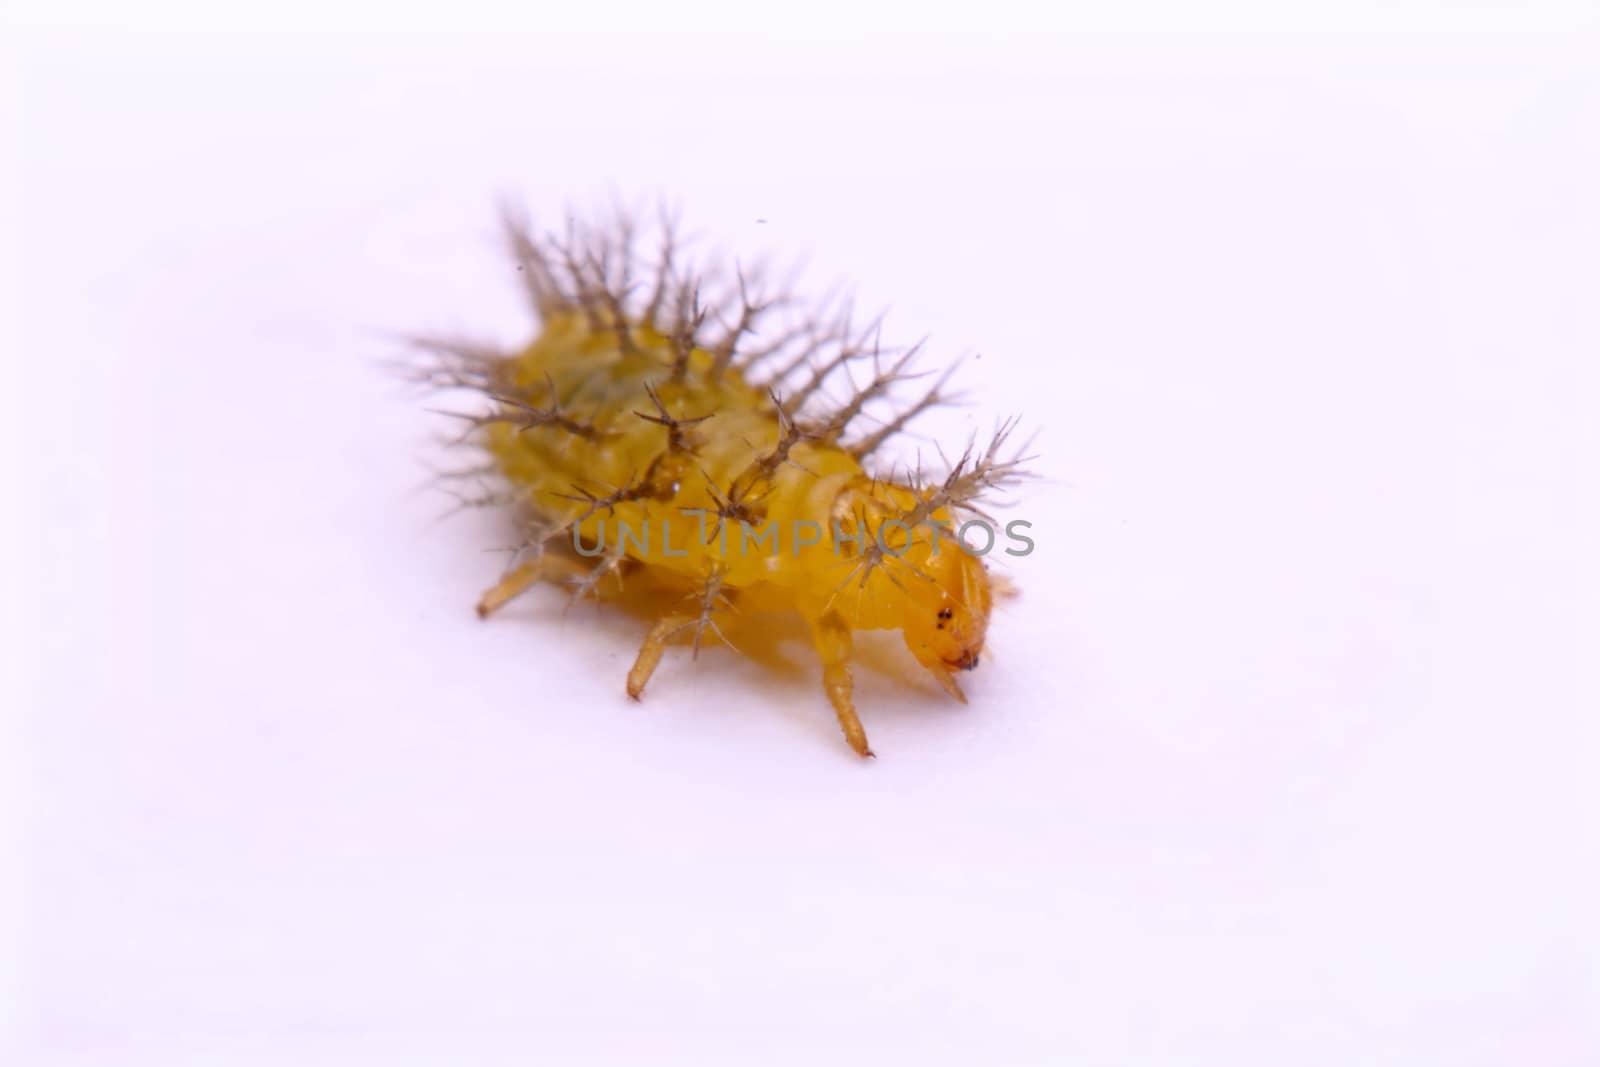 Macro image of a spiny caterpillar white background.